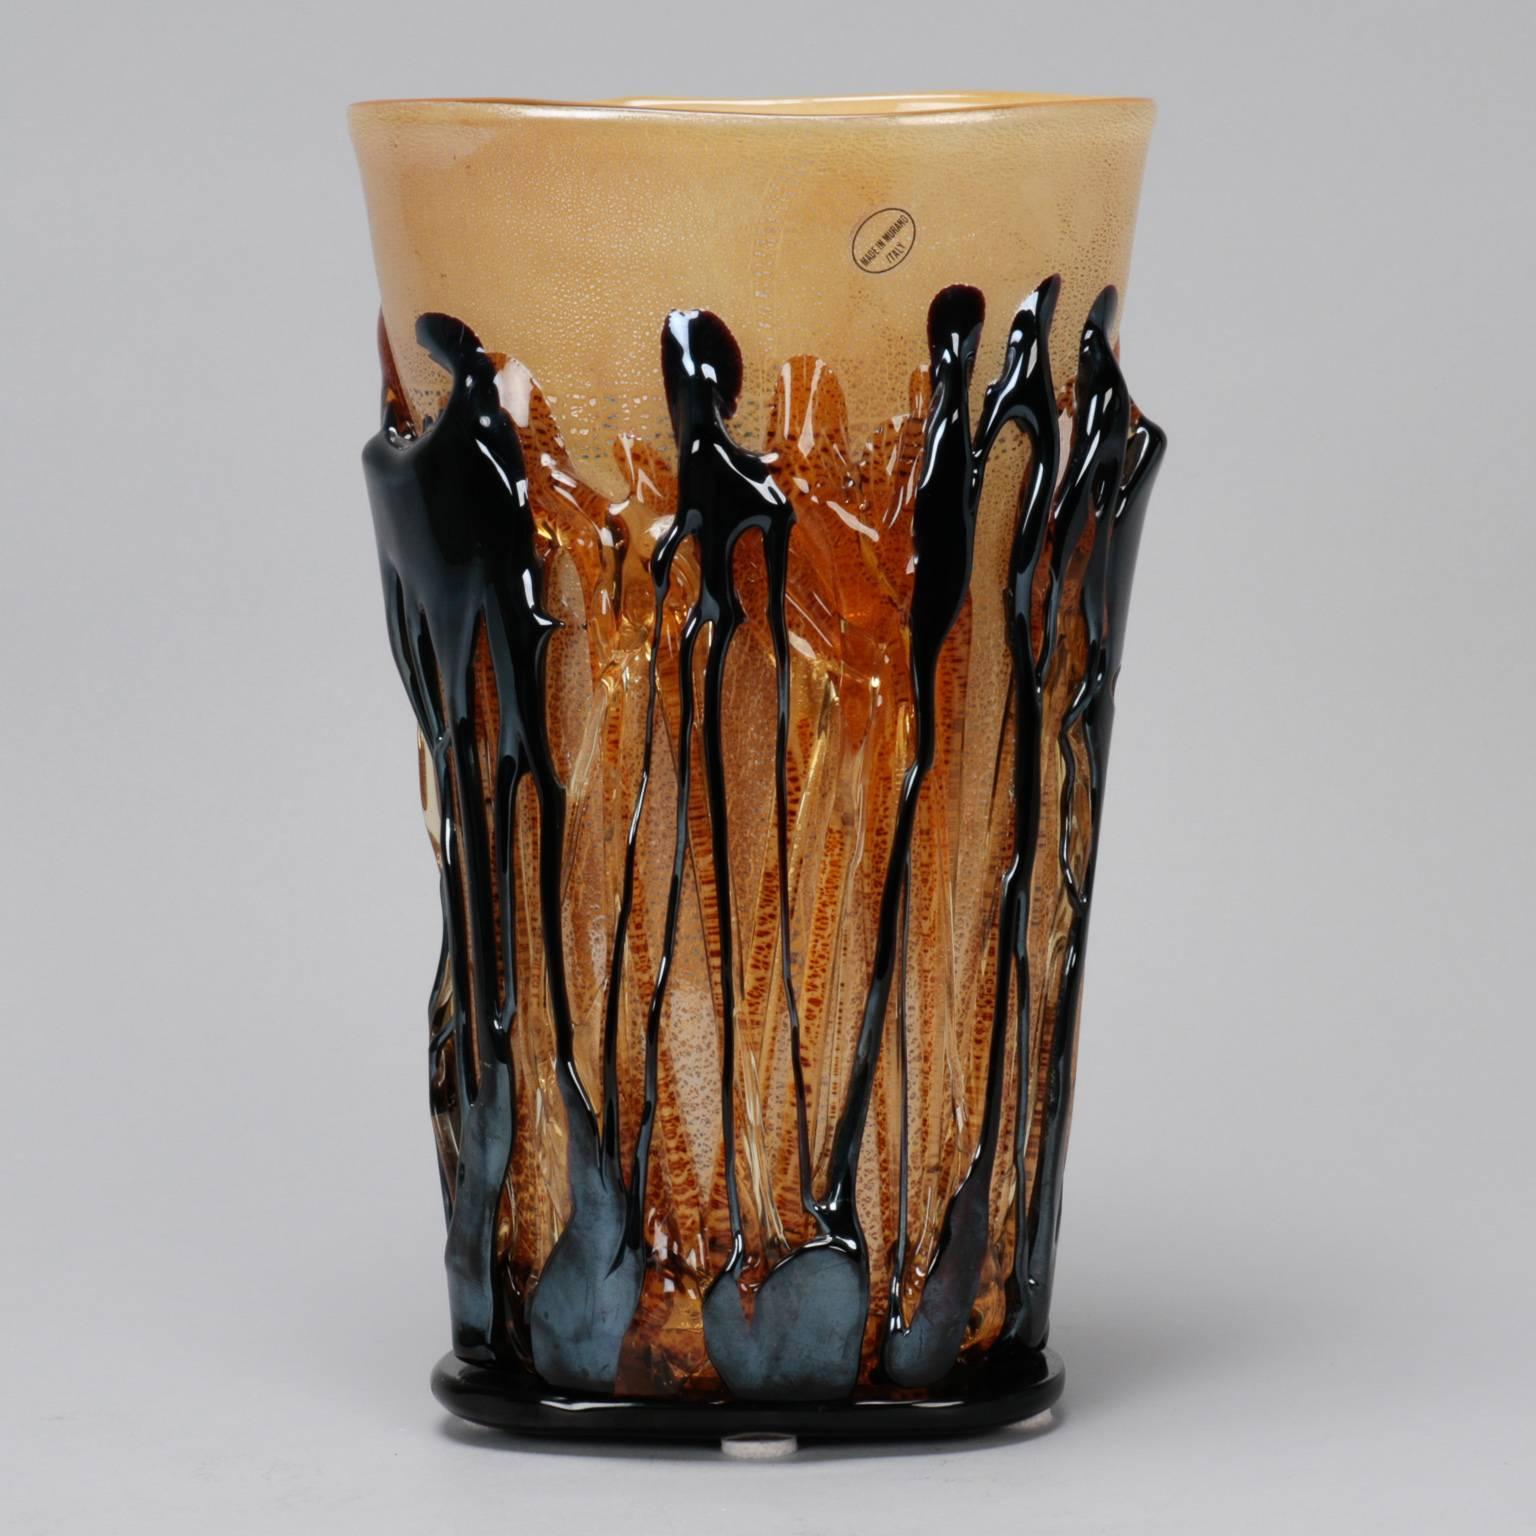 Creamy golden taupe colored Murano glass vase, circa 1990s with a subtly flared shape that stands just over 12” high. Base and body of vase are encased in applied black and amber glass strings. Original made in Murano Italy label affixed.